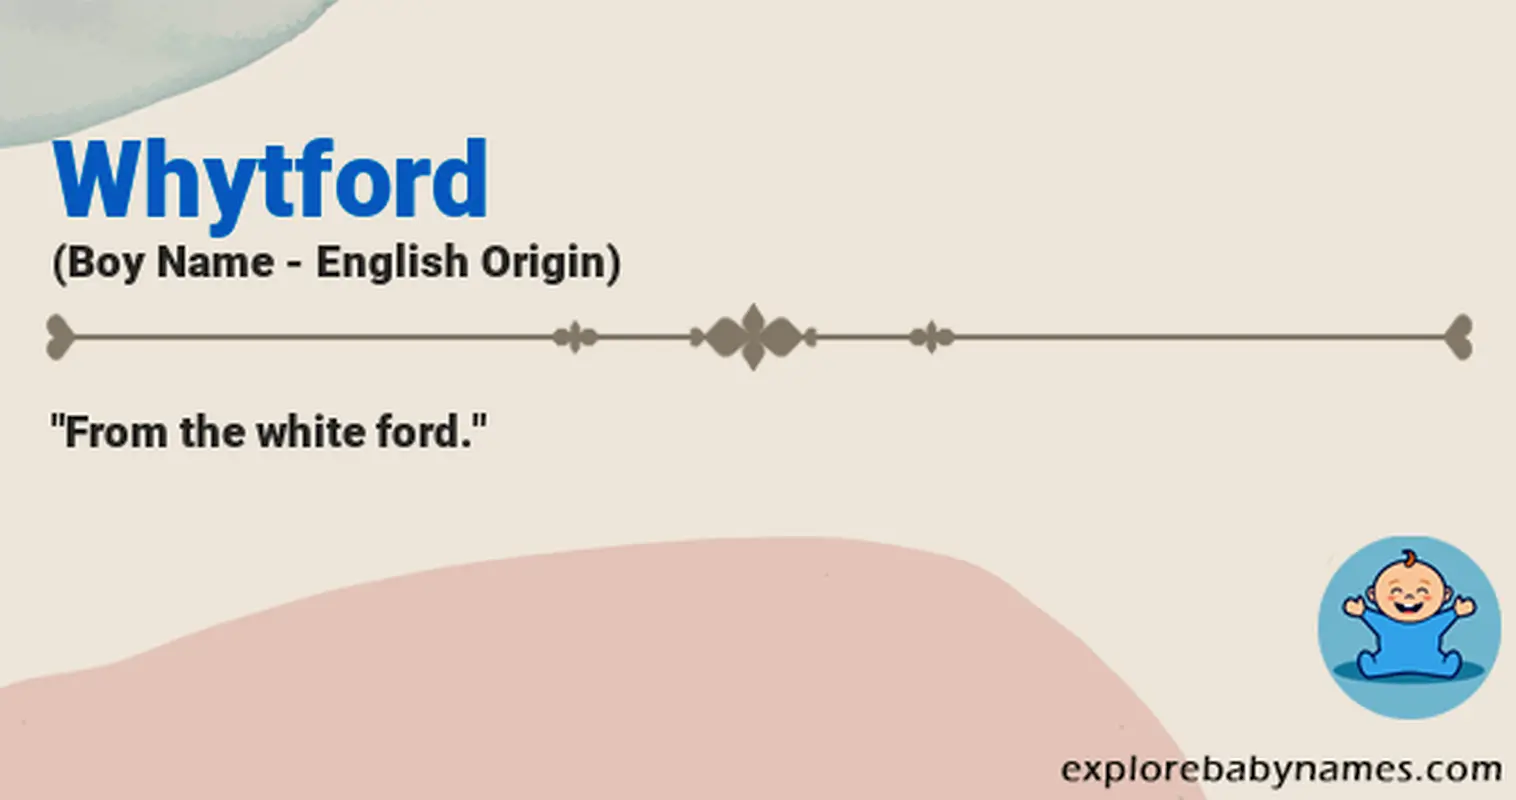 Meaning of Whytford